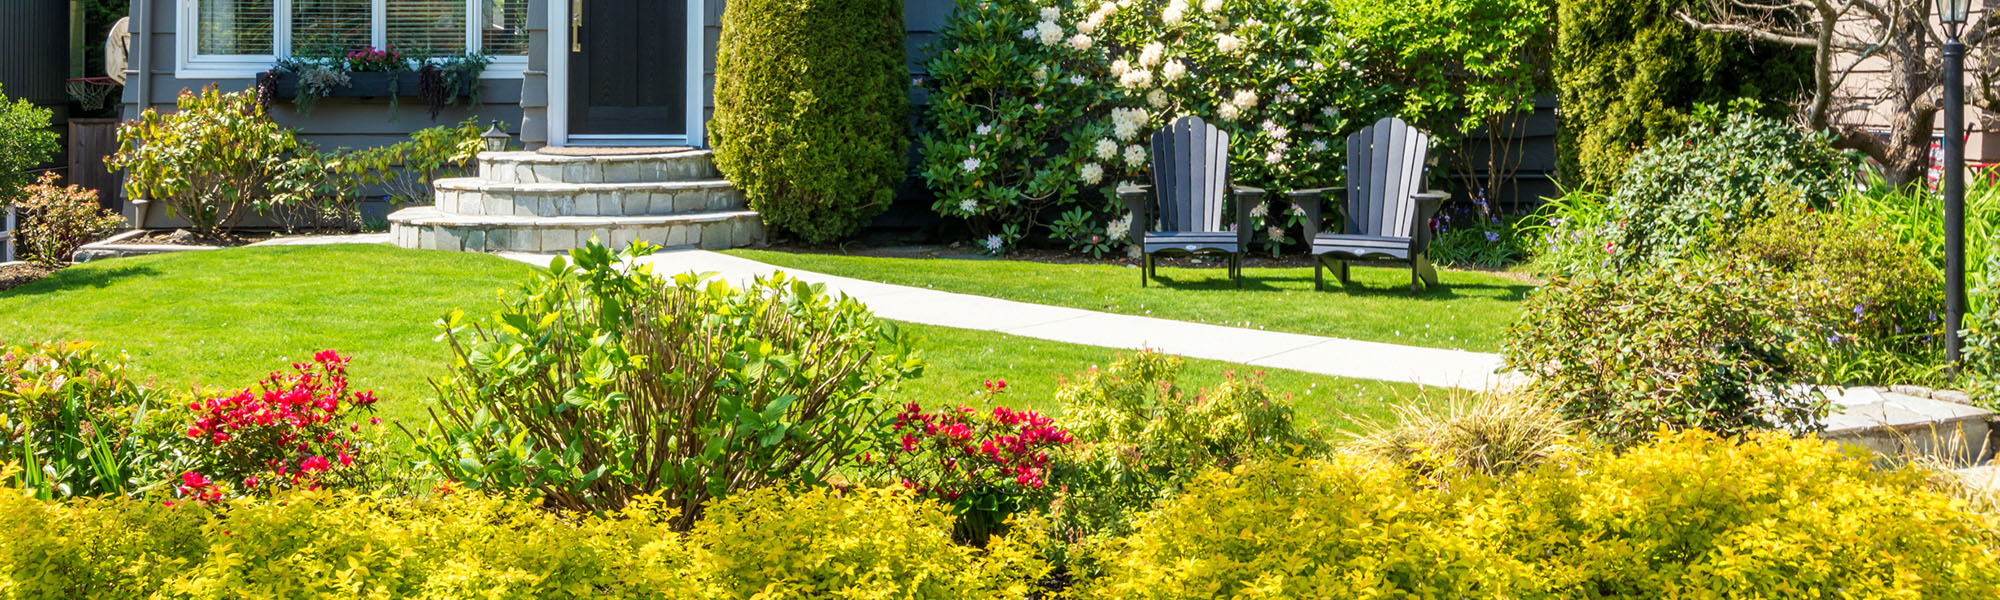 Clean Lawn With Shrubs